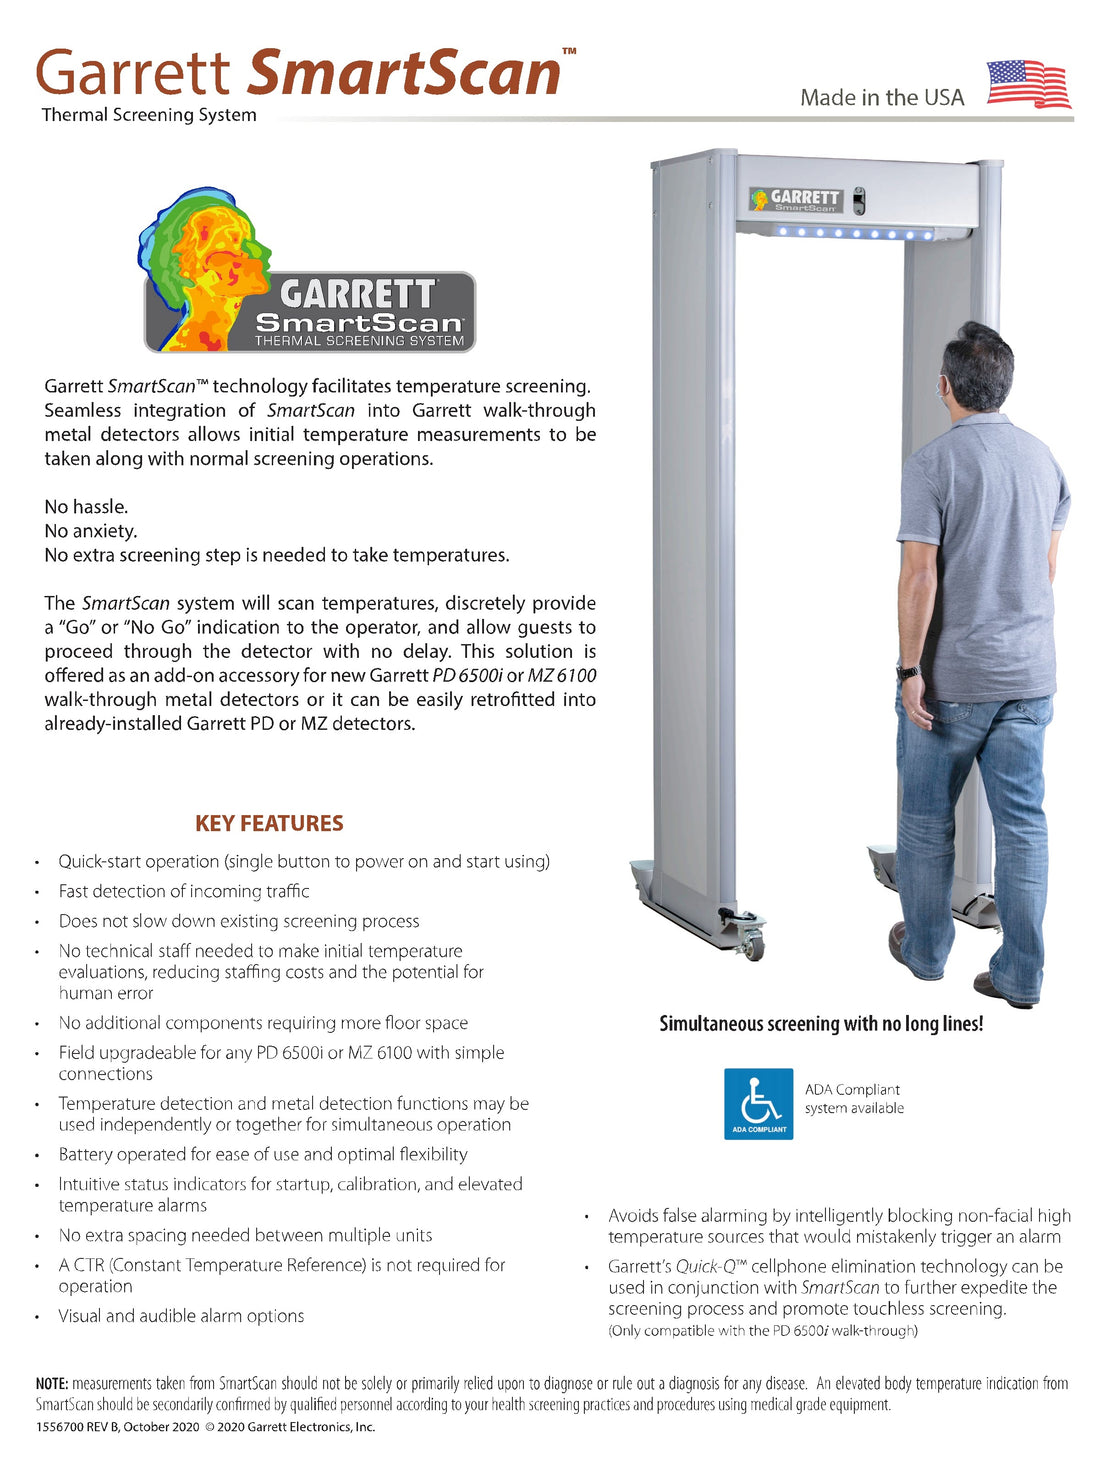 Garrett SmartScan 32.5" ADA Compliant Thermal Screening Add-On for PD 6500i and Multi Zone Specifications A